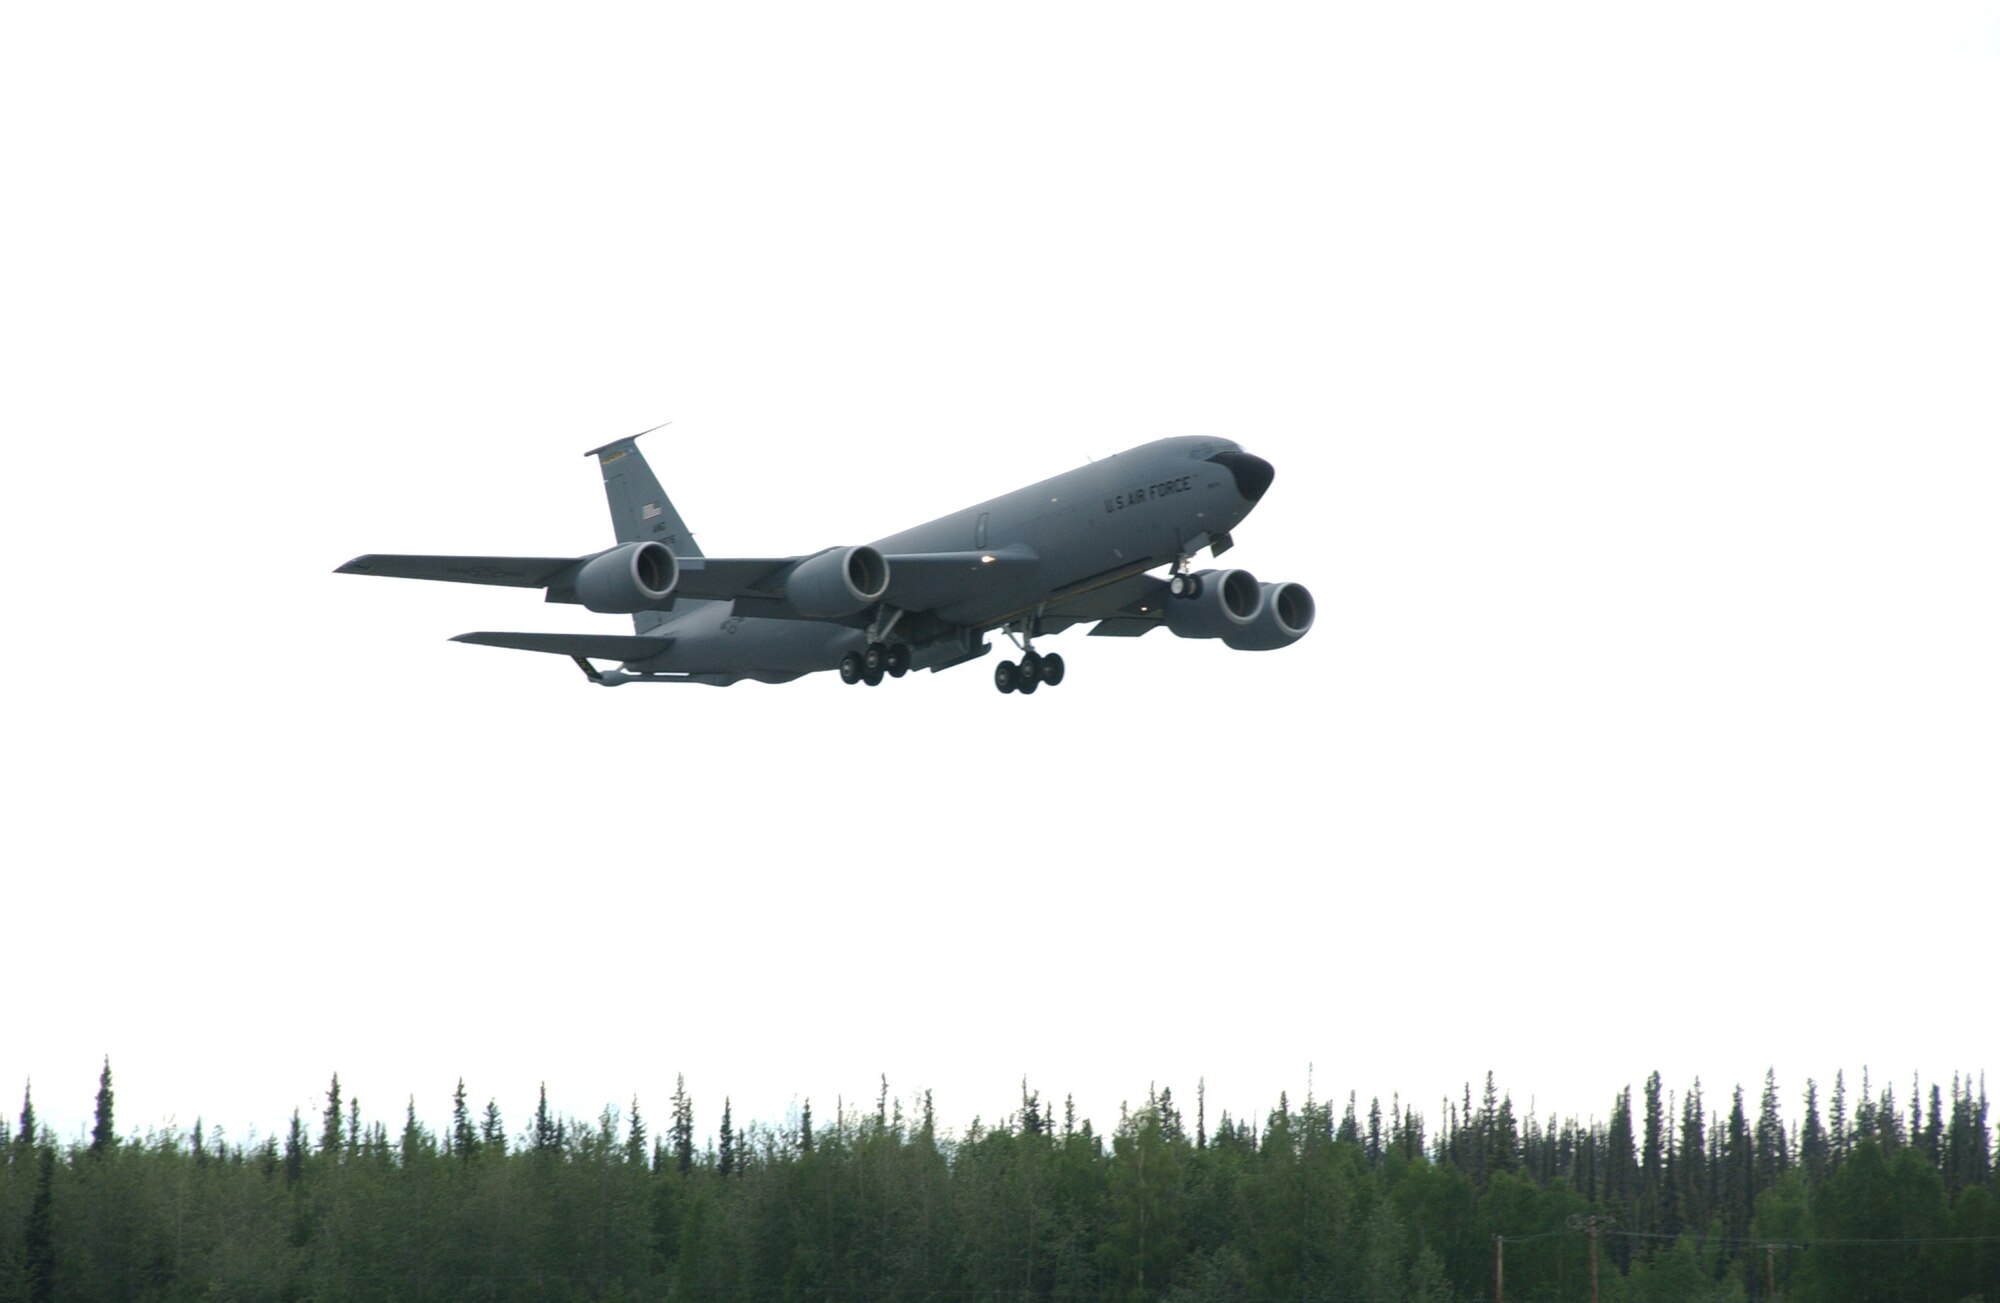 EIELSON AIR FORCE BASE, Alaska -- A KC-135 takes off for an exercise June 5 here. More than 1,400 military members from the United States, Singapore and Australia converged on Alaska May 31 to sharpen their collective war-fighting edge in Red Flag-Alaska 07-2, which runs through June 15. (U.S. Air Force photo by Airman 1st Class Christopher Griffin)